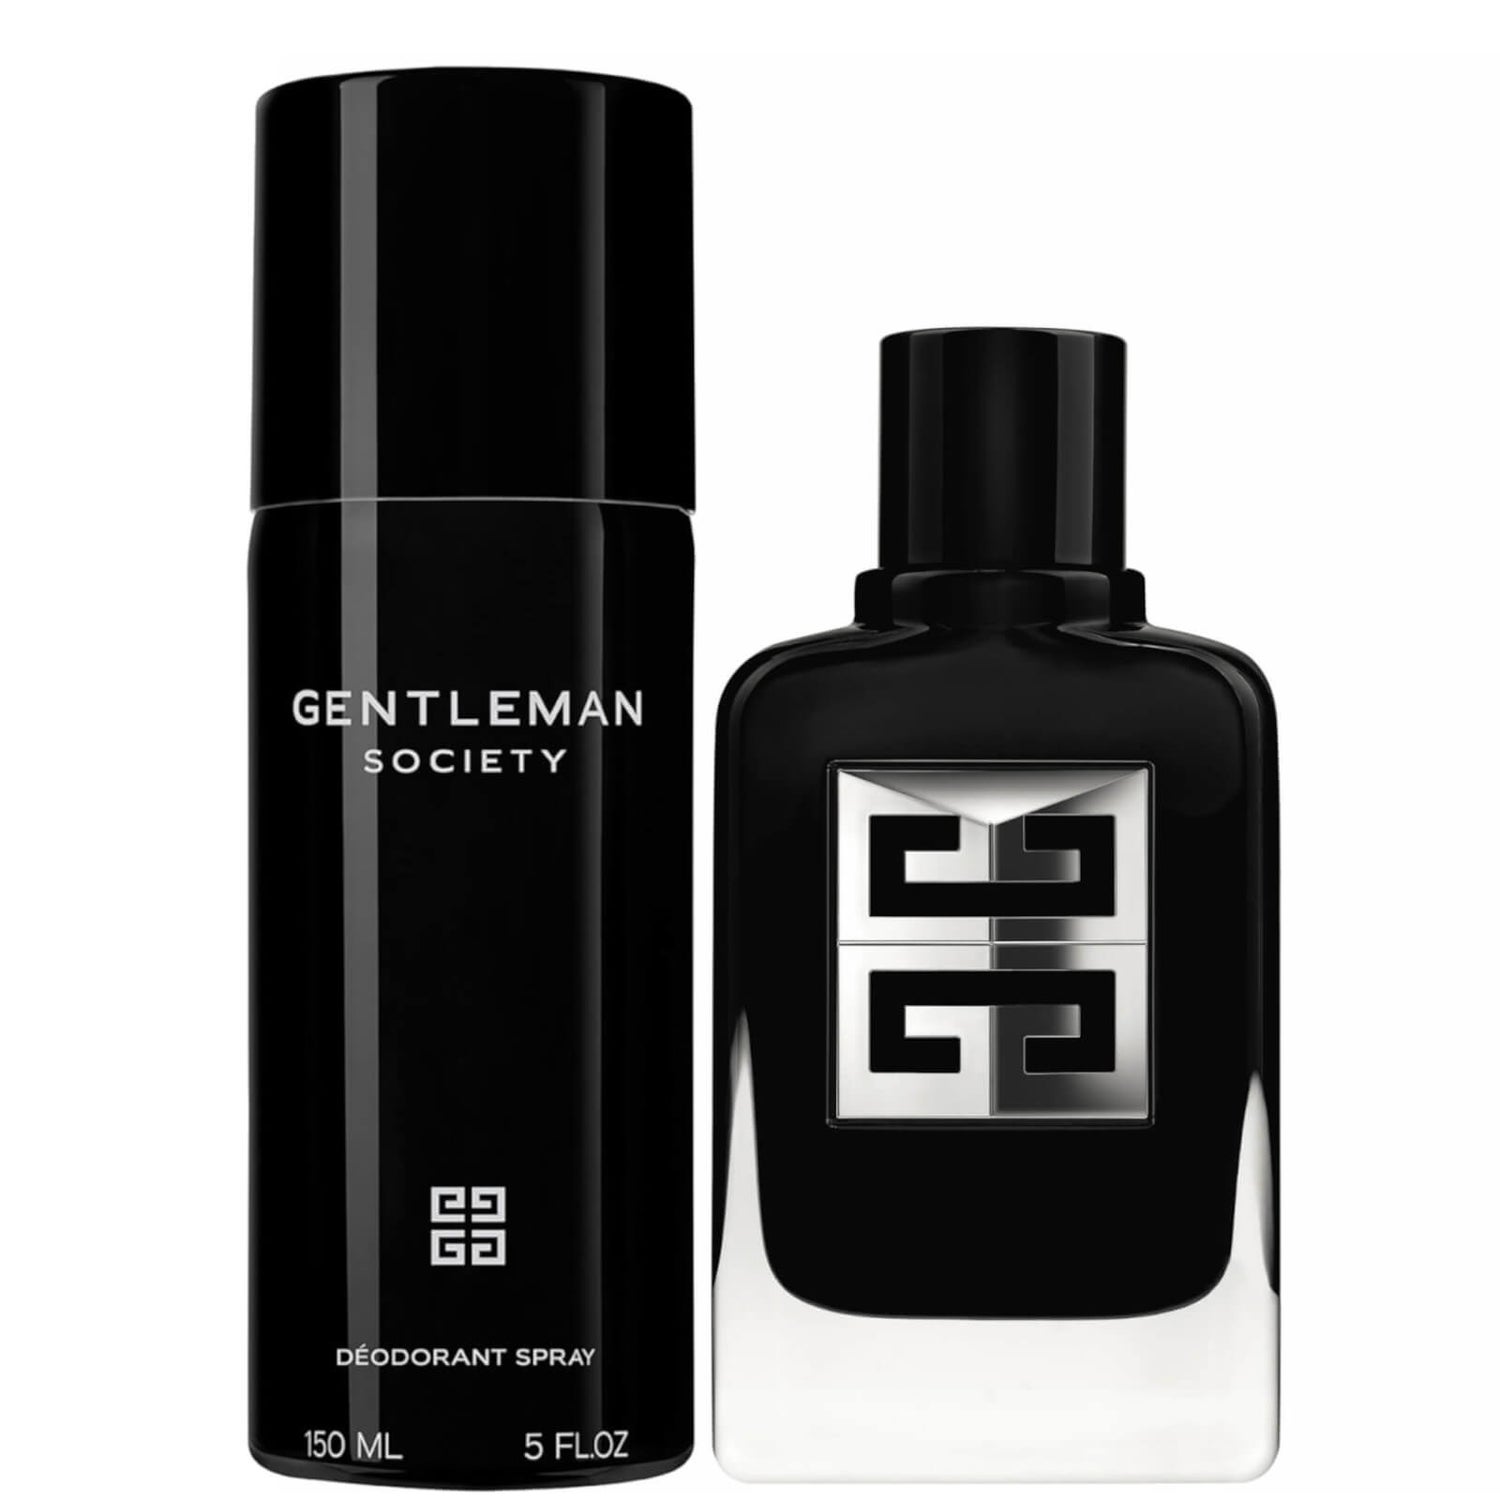 Givenchy Gentleman Society 60ml and Deo Bundle